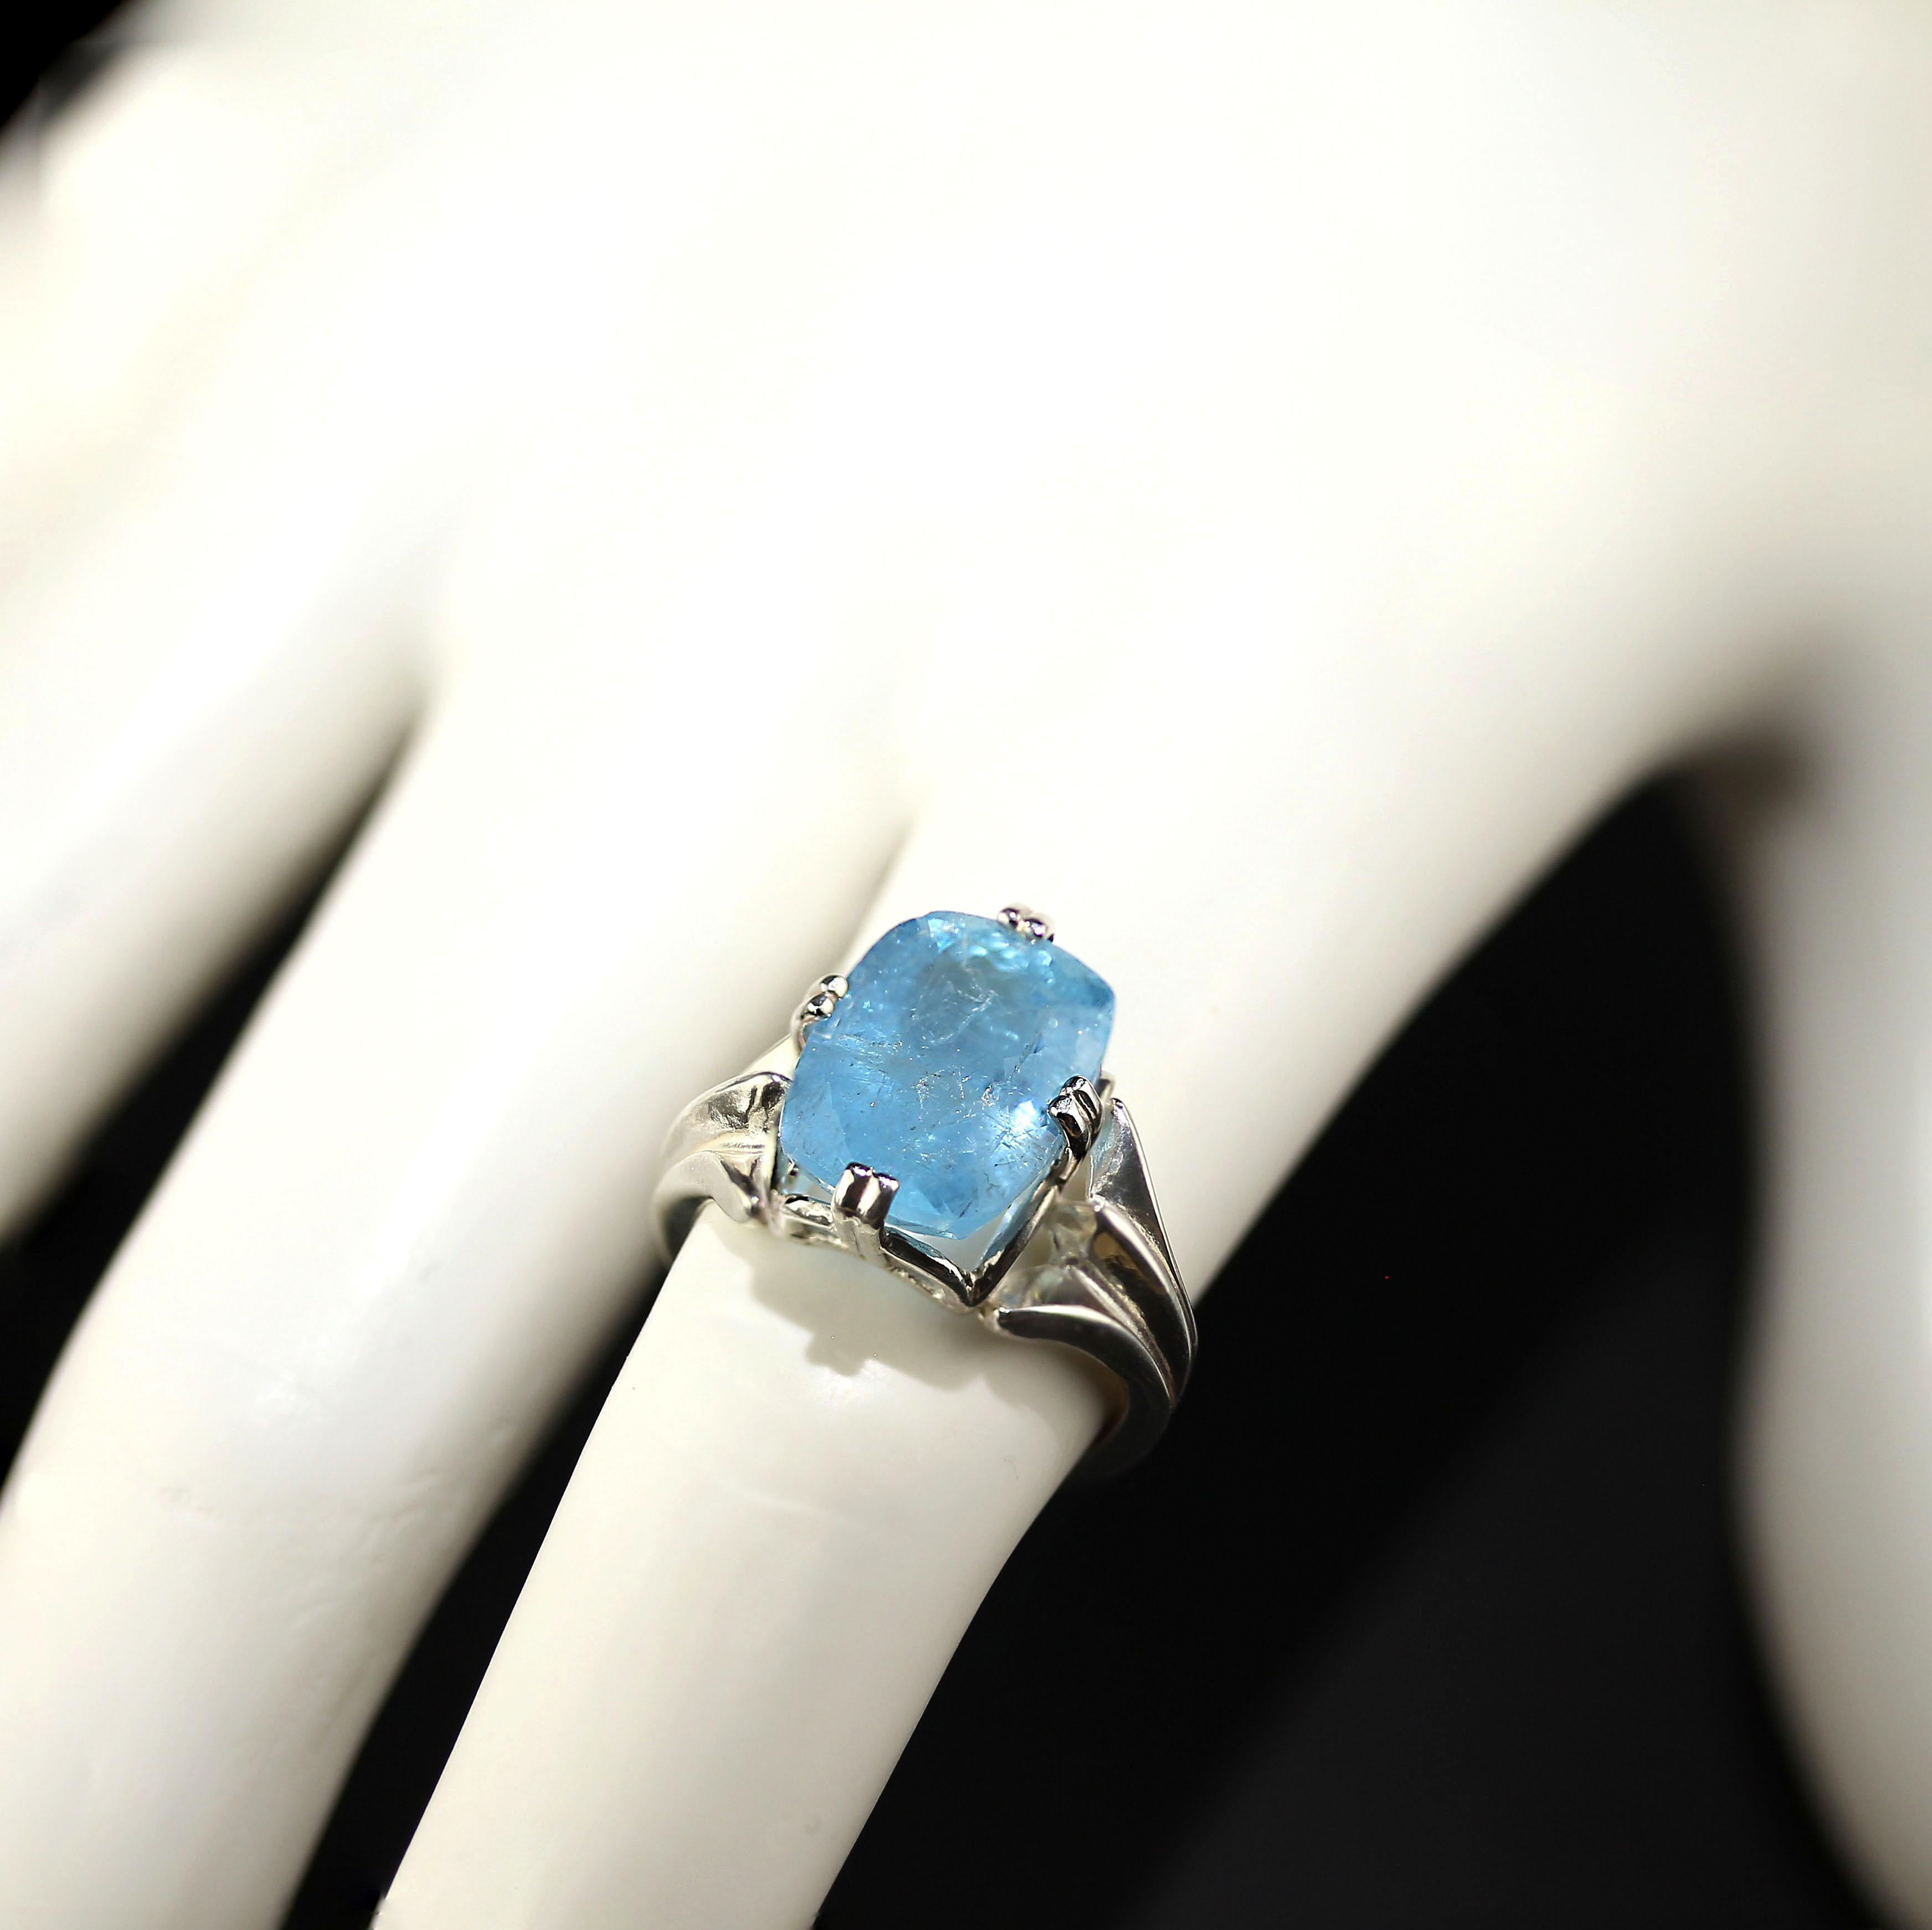 Artisan AJD Cocktail Ring of Blue Aquamarine Set in Silver March Birthstone